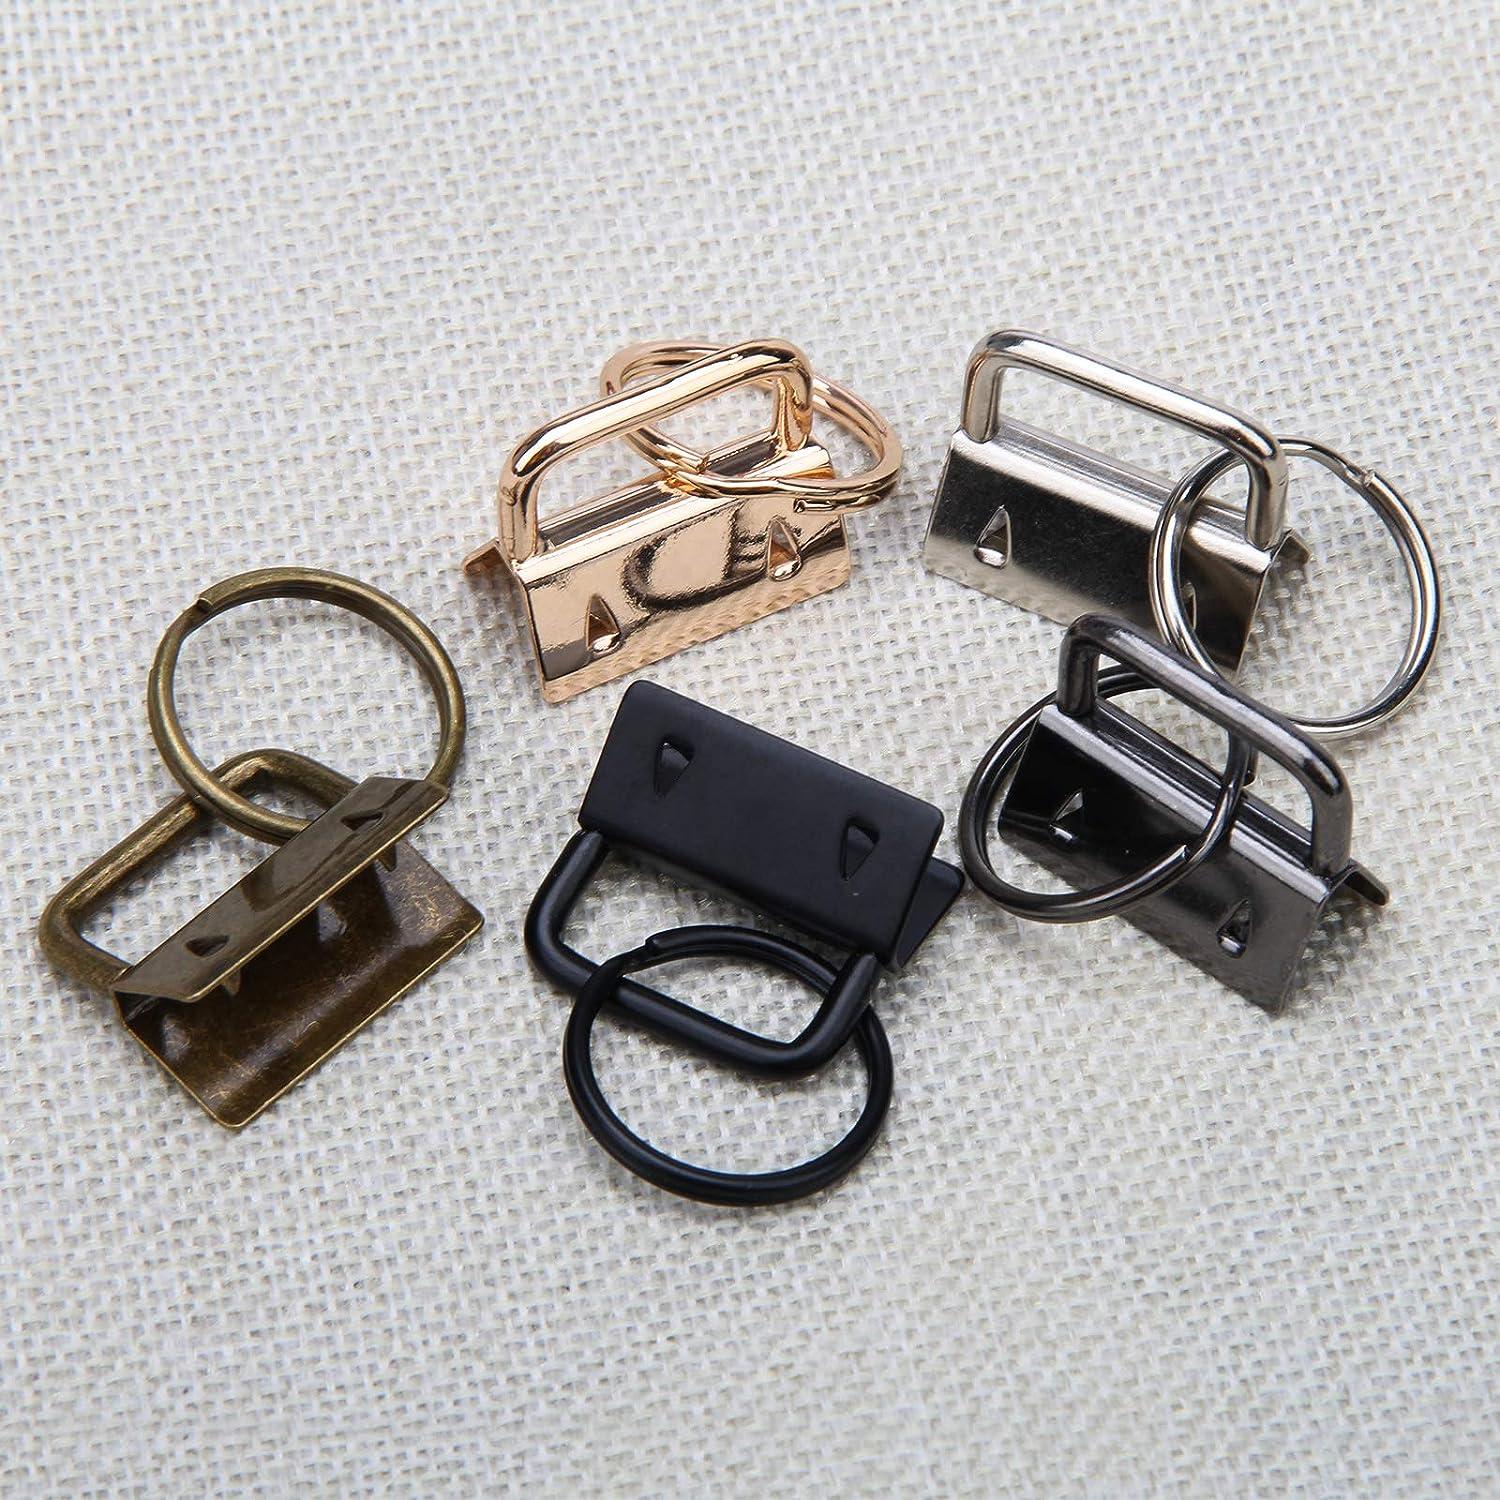 2Pcs 26mm Key Fob Hardware With Key Rings For Bag Wristlets With